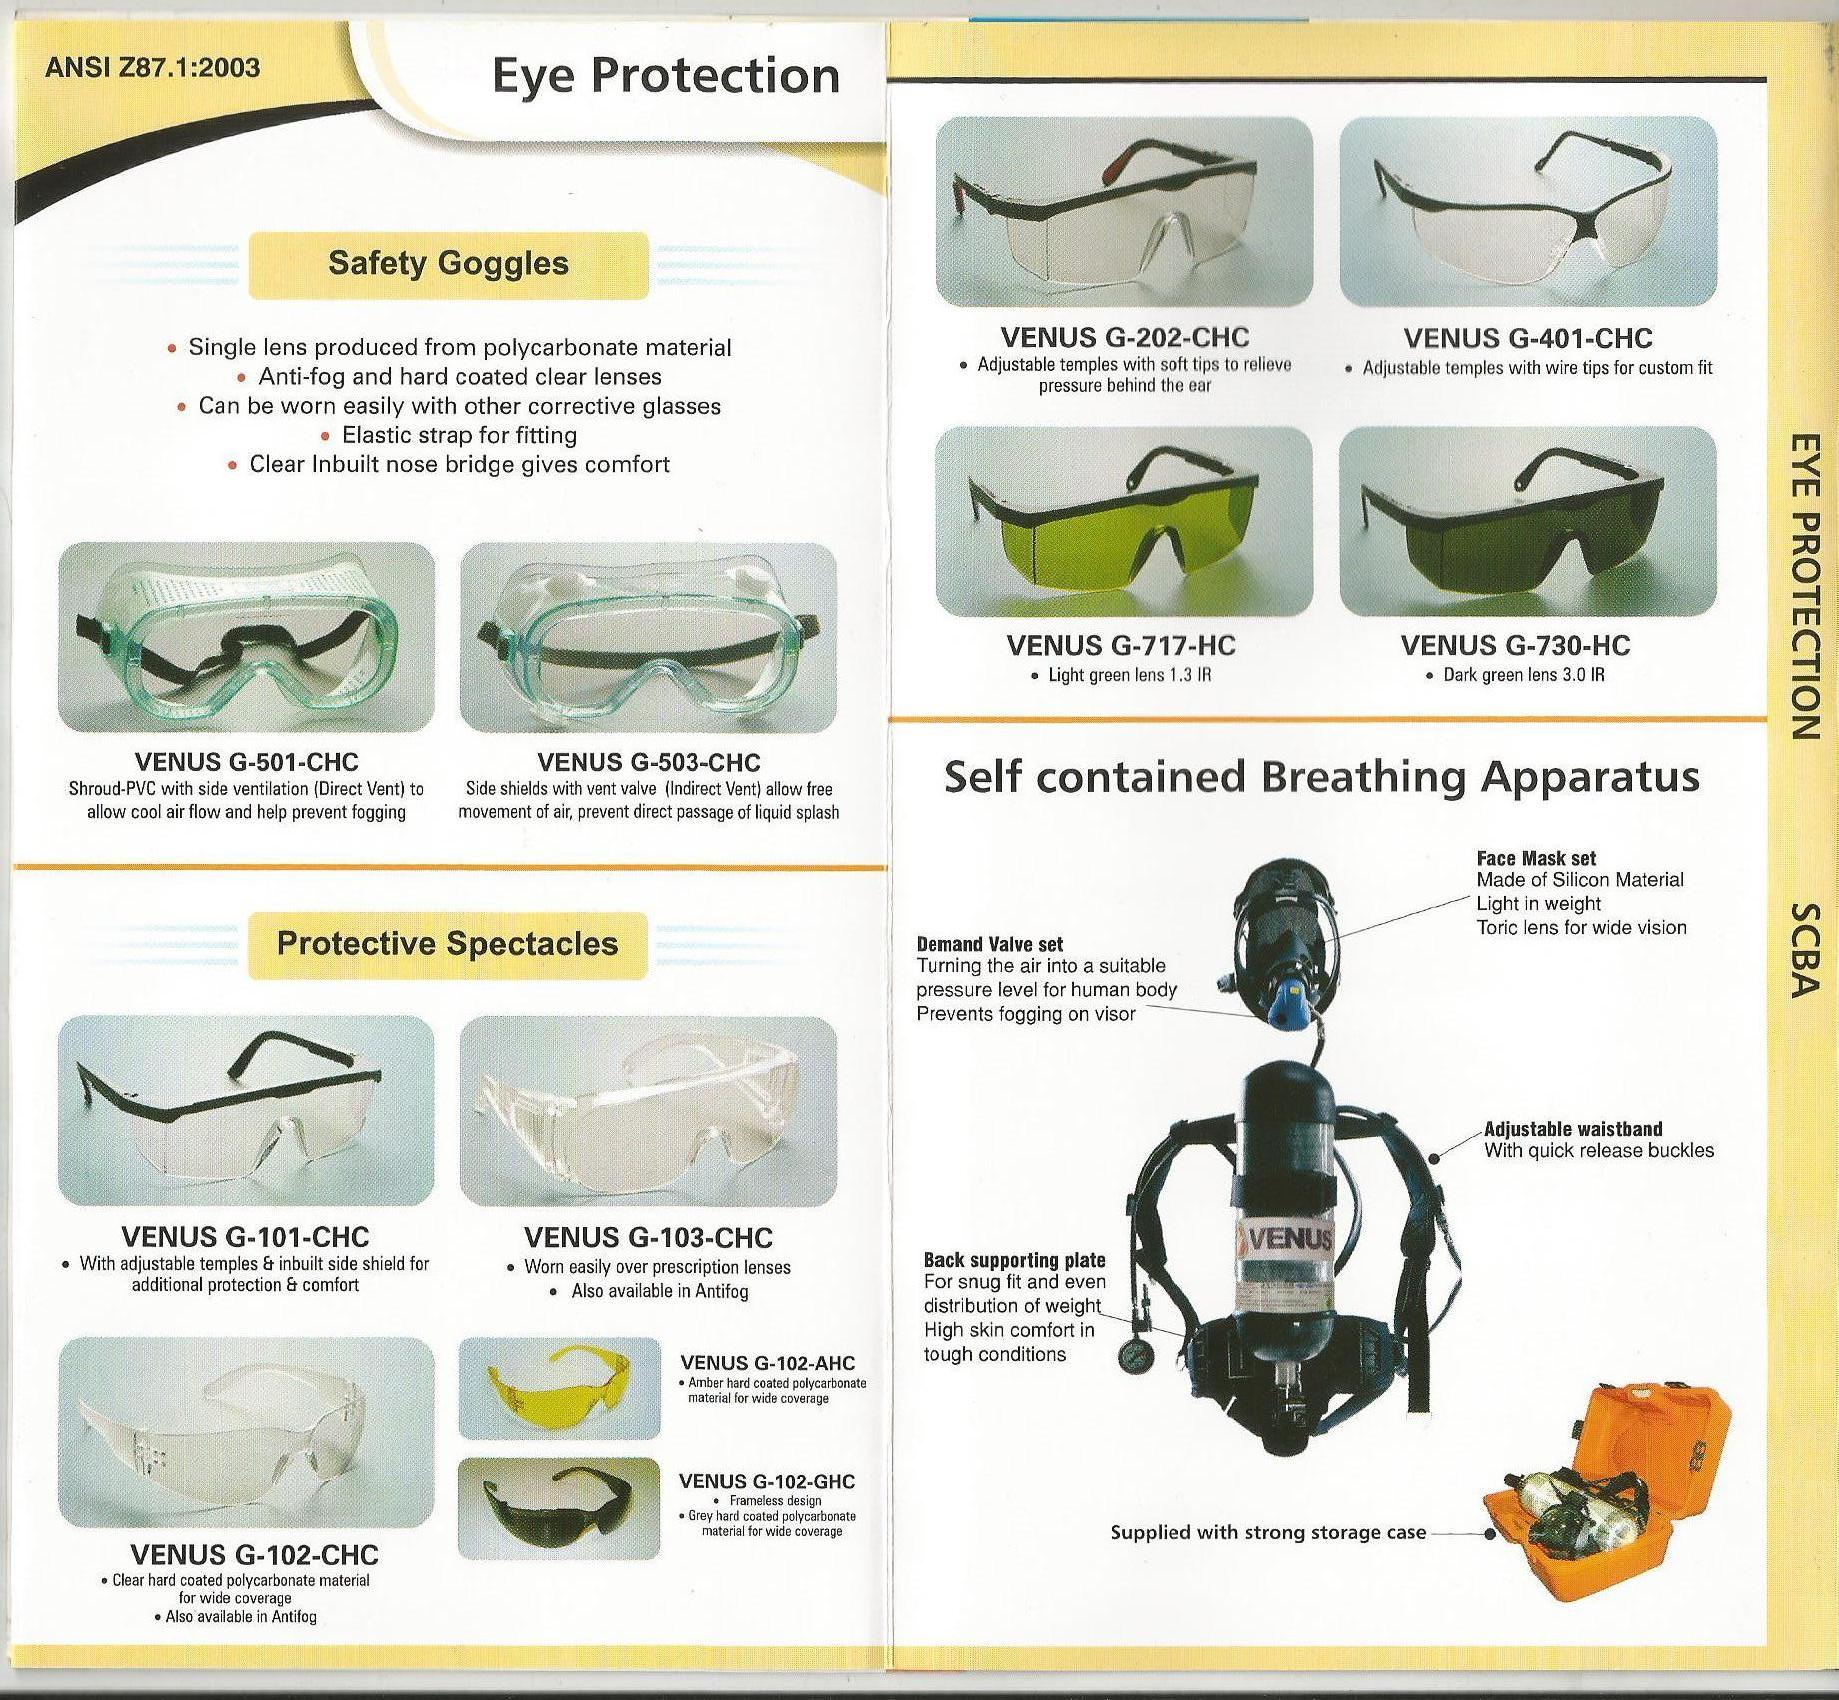 Industrial Safety Goggles Manufacturer Supplier Wholesale Exporter Importer Buyer Trader Retailer in DOMBIVLI (E) Maharashtra India